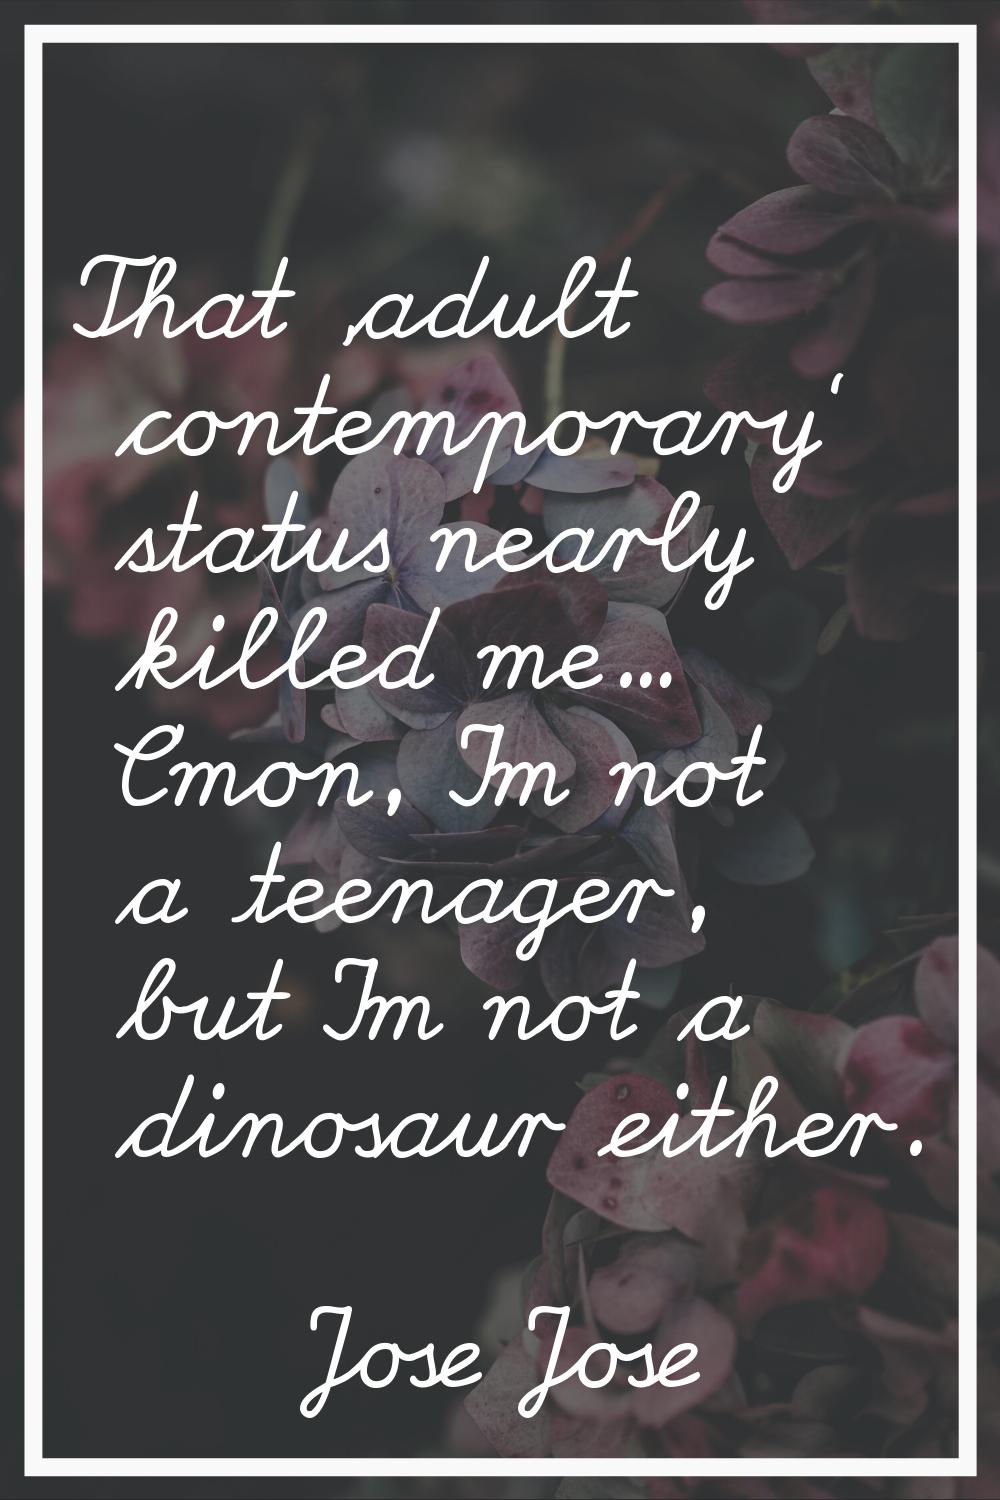 That 'adult contemporary' status nearly killed me... C'mon, I'm not a teenager, but I'm not a dinos